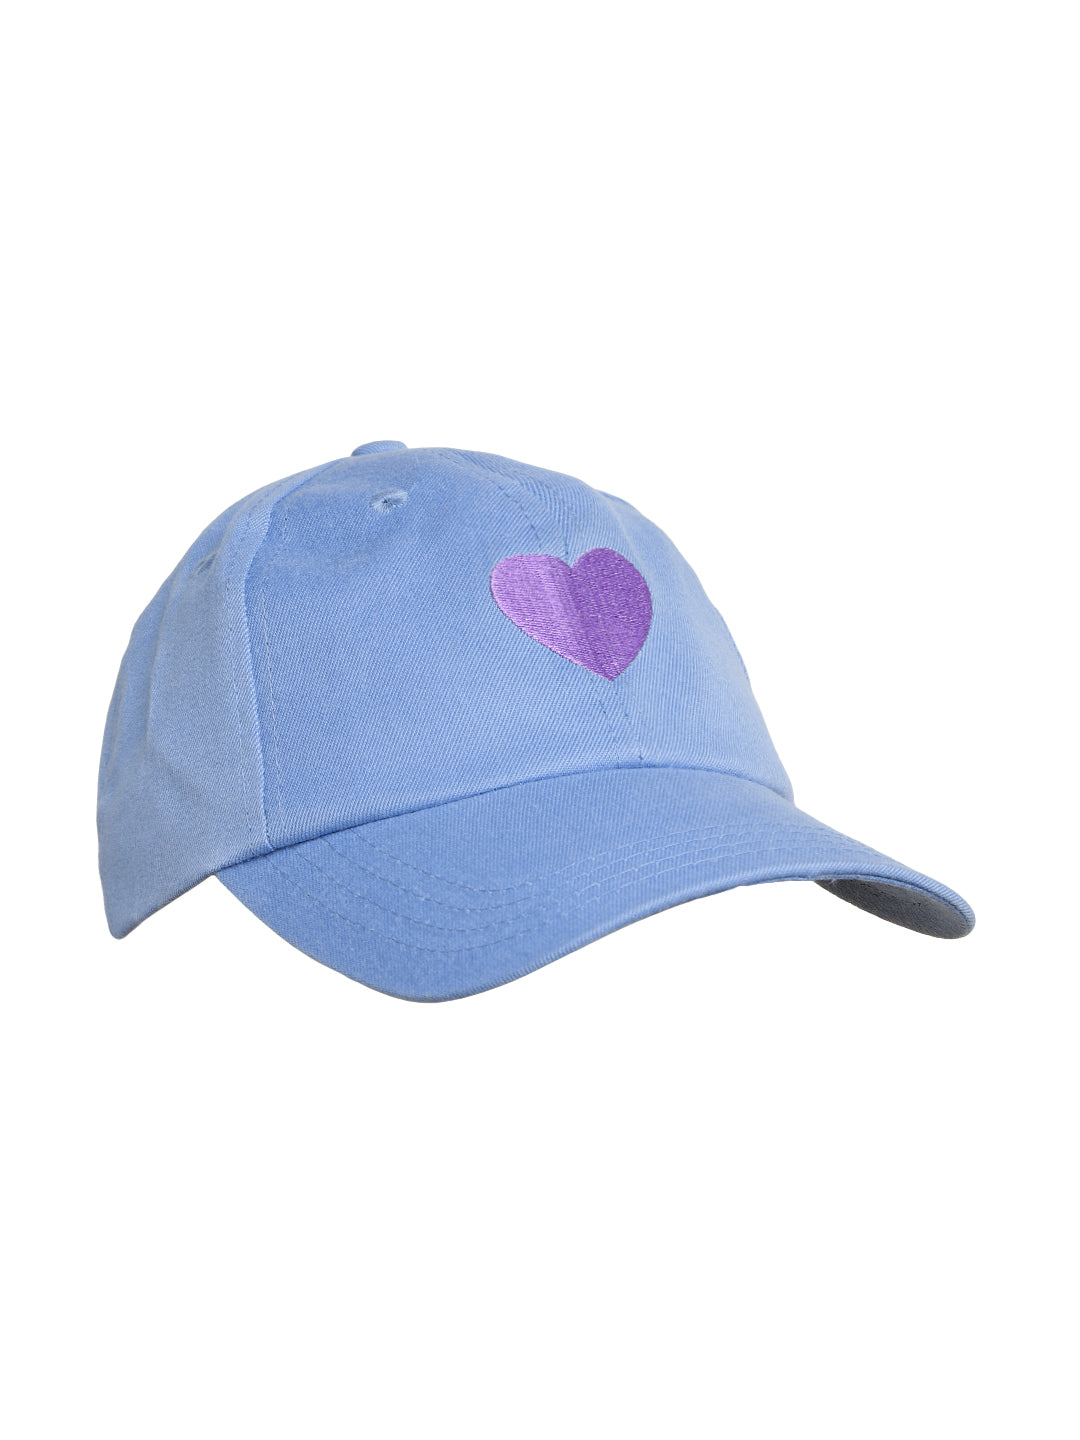 Blueberry KIDS pink red heart embroidery baseball cap